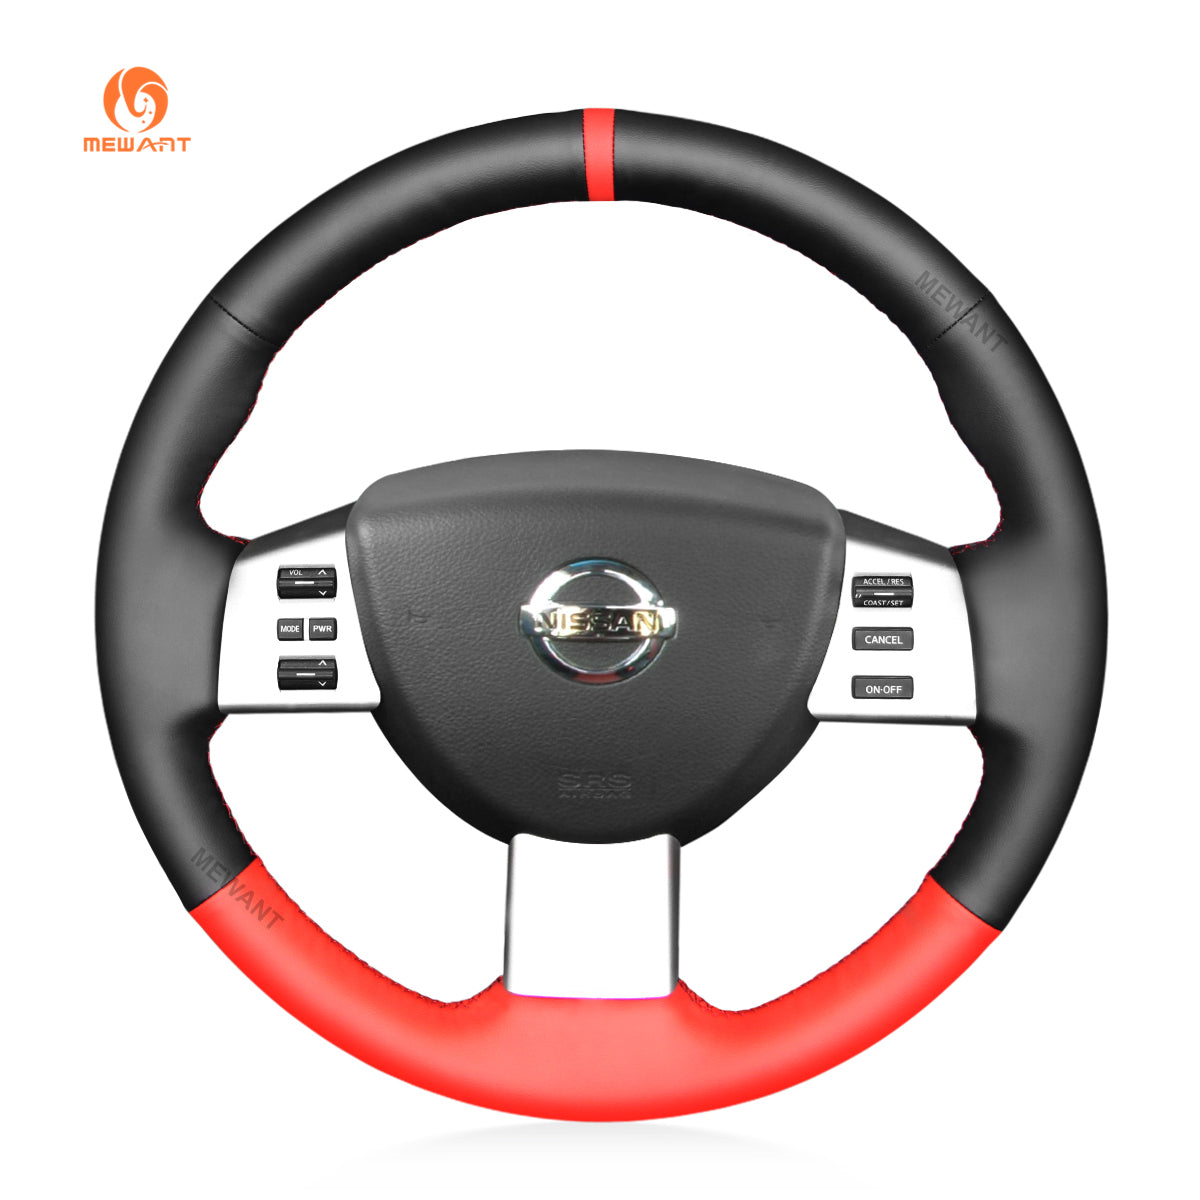 MEWANT DIY Black Leather Suede Car Steering Wheel Cover for Nissan Altima Maxima Murano Quest